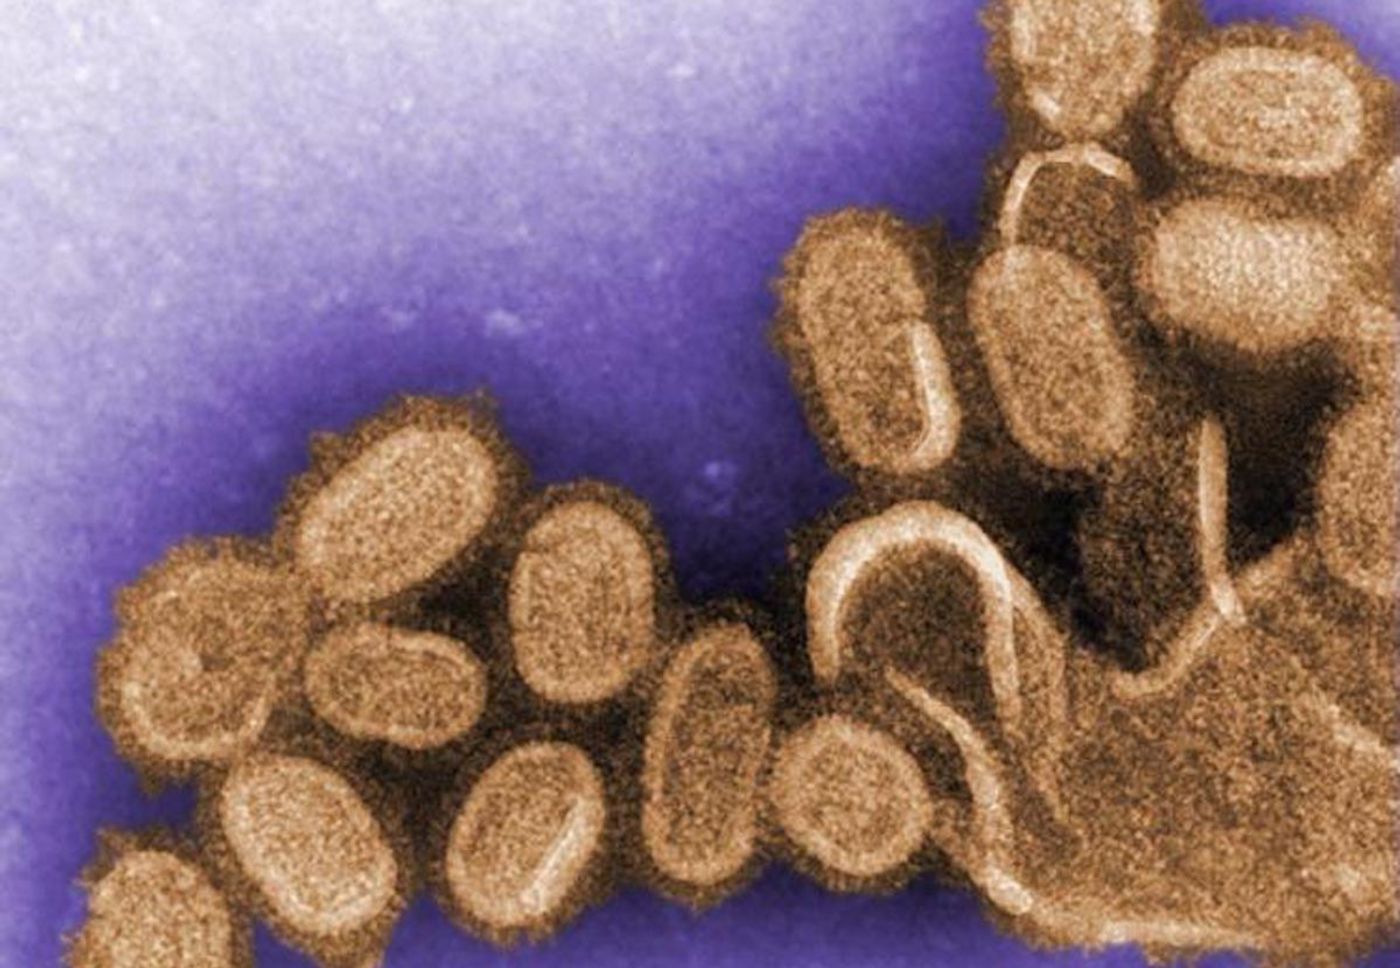 Modified from a digitally-colorized negative-stained transmission electron microscopic (TEM) image shows recreated 1918 influenza virions that were collected from supernatants of 1918-infected Madin-Darby Canine Kidney (MDCK) cells cultures 18 hours after infection. / Credit: CDC/ Dr. Terrence Tumpey